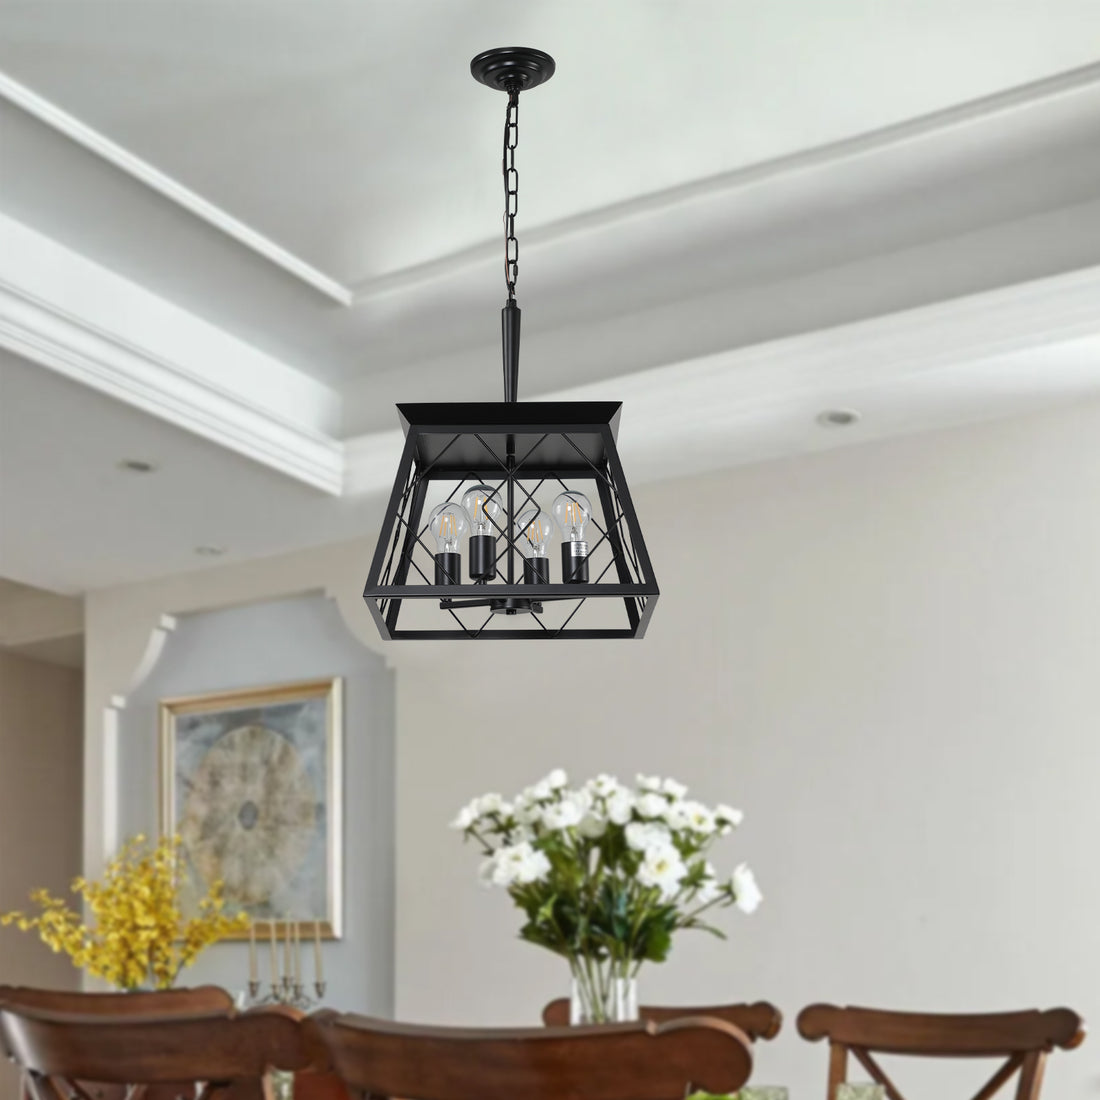 4 Light Farmhouse Chandeliers For Dining Room